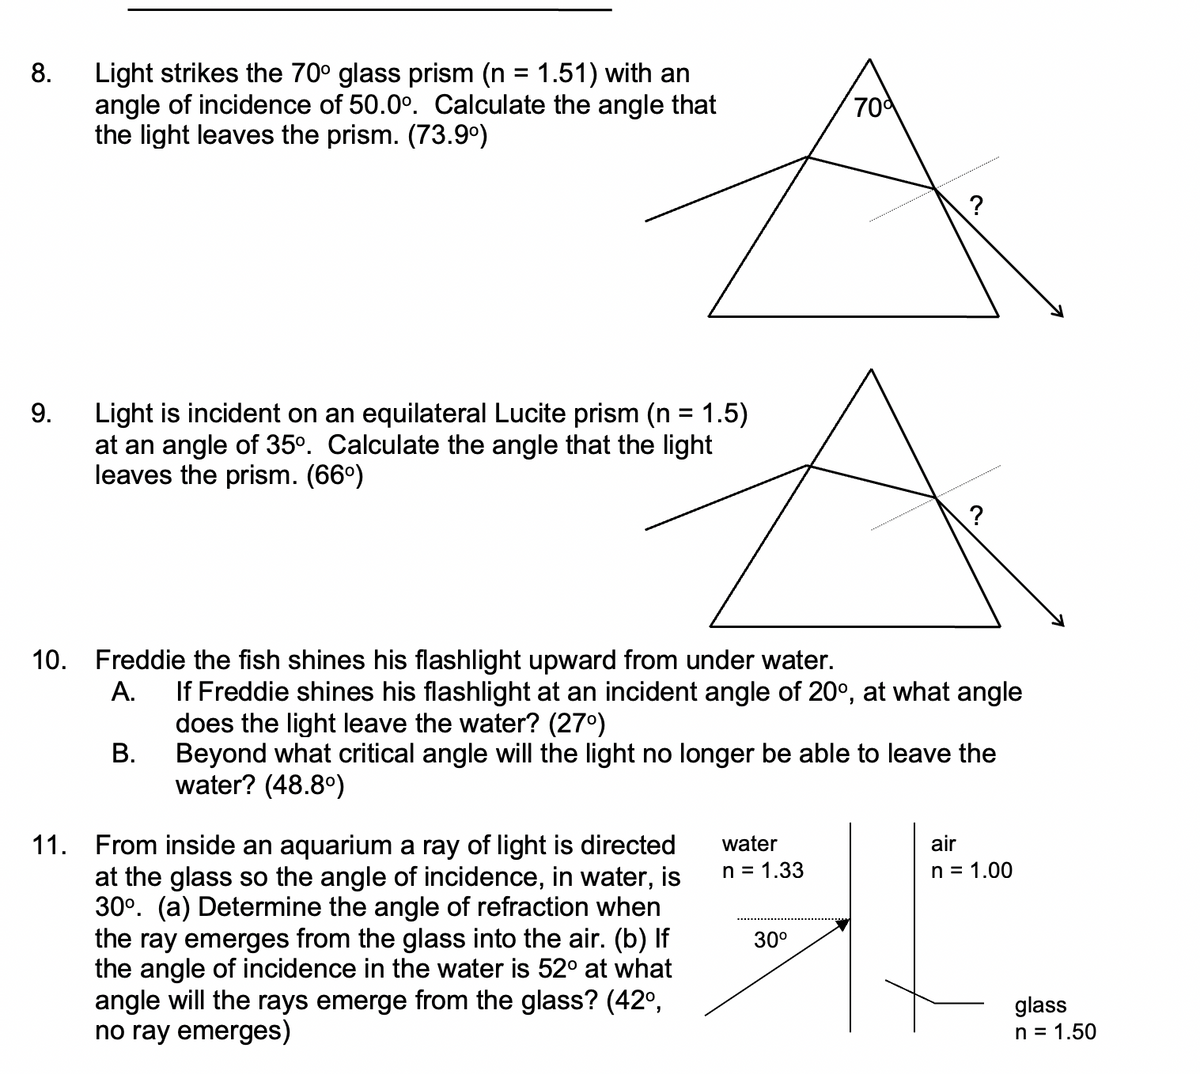 8.
Light strikes the 70° glass prism (n = 1.51) with an
angle of incidence of 50.0°. Calculate the angle that
the light leaves the prism. (73.9°)
70d
9.
Light is incident on an equilateral Lucite prism (n = 1.5)
at an angle of 35°. Calculate the angle that the light
leaves the prism. (66°)
%3D
?
10. Freddie the fish shines his flashlight upward from under water.
If Freddie shines his flashlight at an incident angle of 20°, at what angle
does the light leave the water? (27°)
В.
A.
Beyond what critical angle will the light no longer be able to leave the
water? (48.8°)
11. From inside an aquarium a ray of light is directed
at the glass so the angle of incidence, in water, is
30°. (a) Determine the angle of refraction when
the ray emerges from the glass into the air. (b) If
the angle of incidence in the water is 52° at what
angle will the rays emerge from the glass? (42°,
no ray emerges)
water
air
n = 1.33
n = 1.00
30°
glass
n = 1.50
